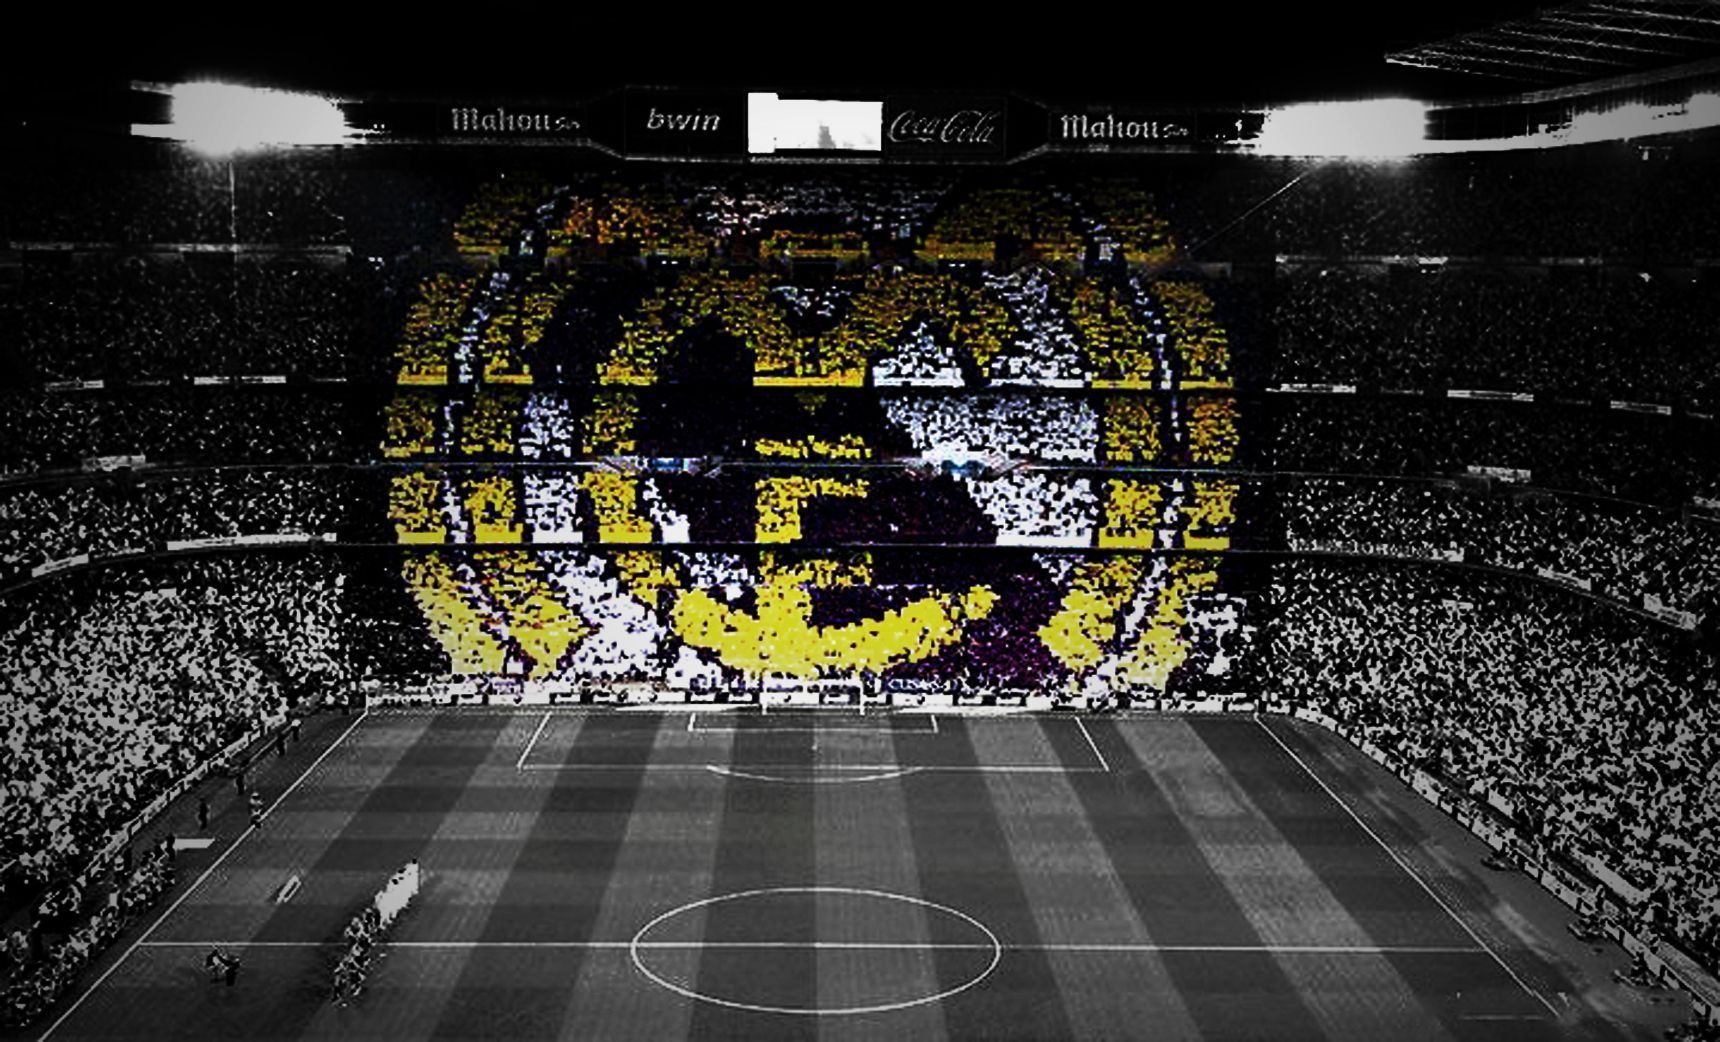 Real madrid's wallpapers by HamzaEzz on DeviantArt